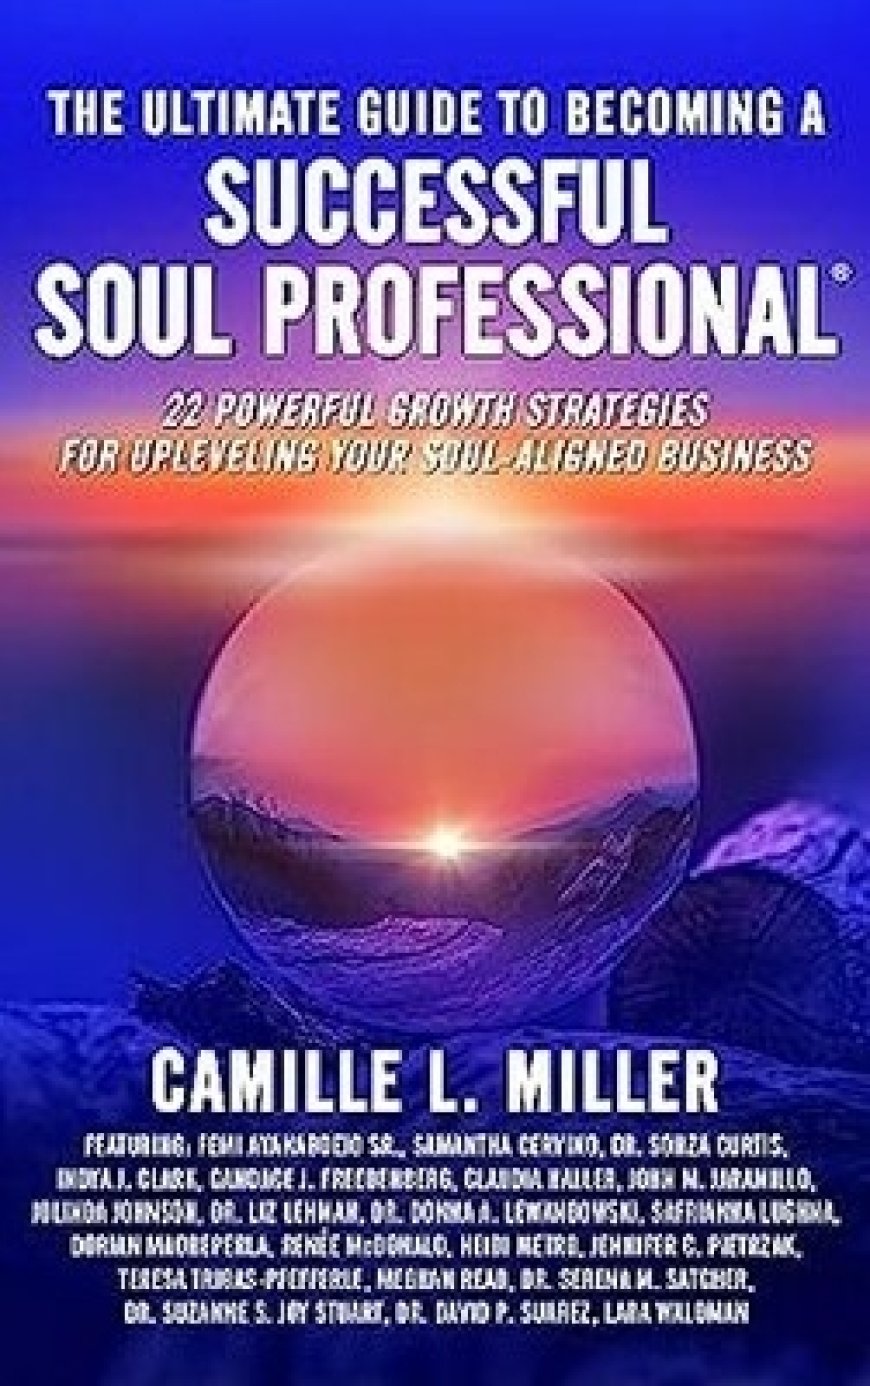 Brave Healer Productions Launches Second Title in its Ultimate Guide Series: "The Ultimate Guide to Becoming a Successful Soul Professional: 22 Powerful Growth Strategies for Upleveling Your Soul-Aligned Business"